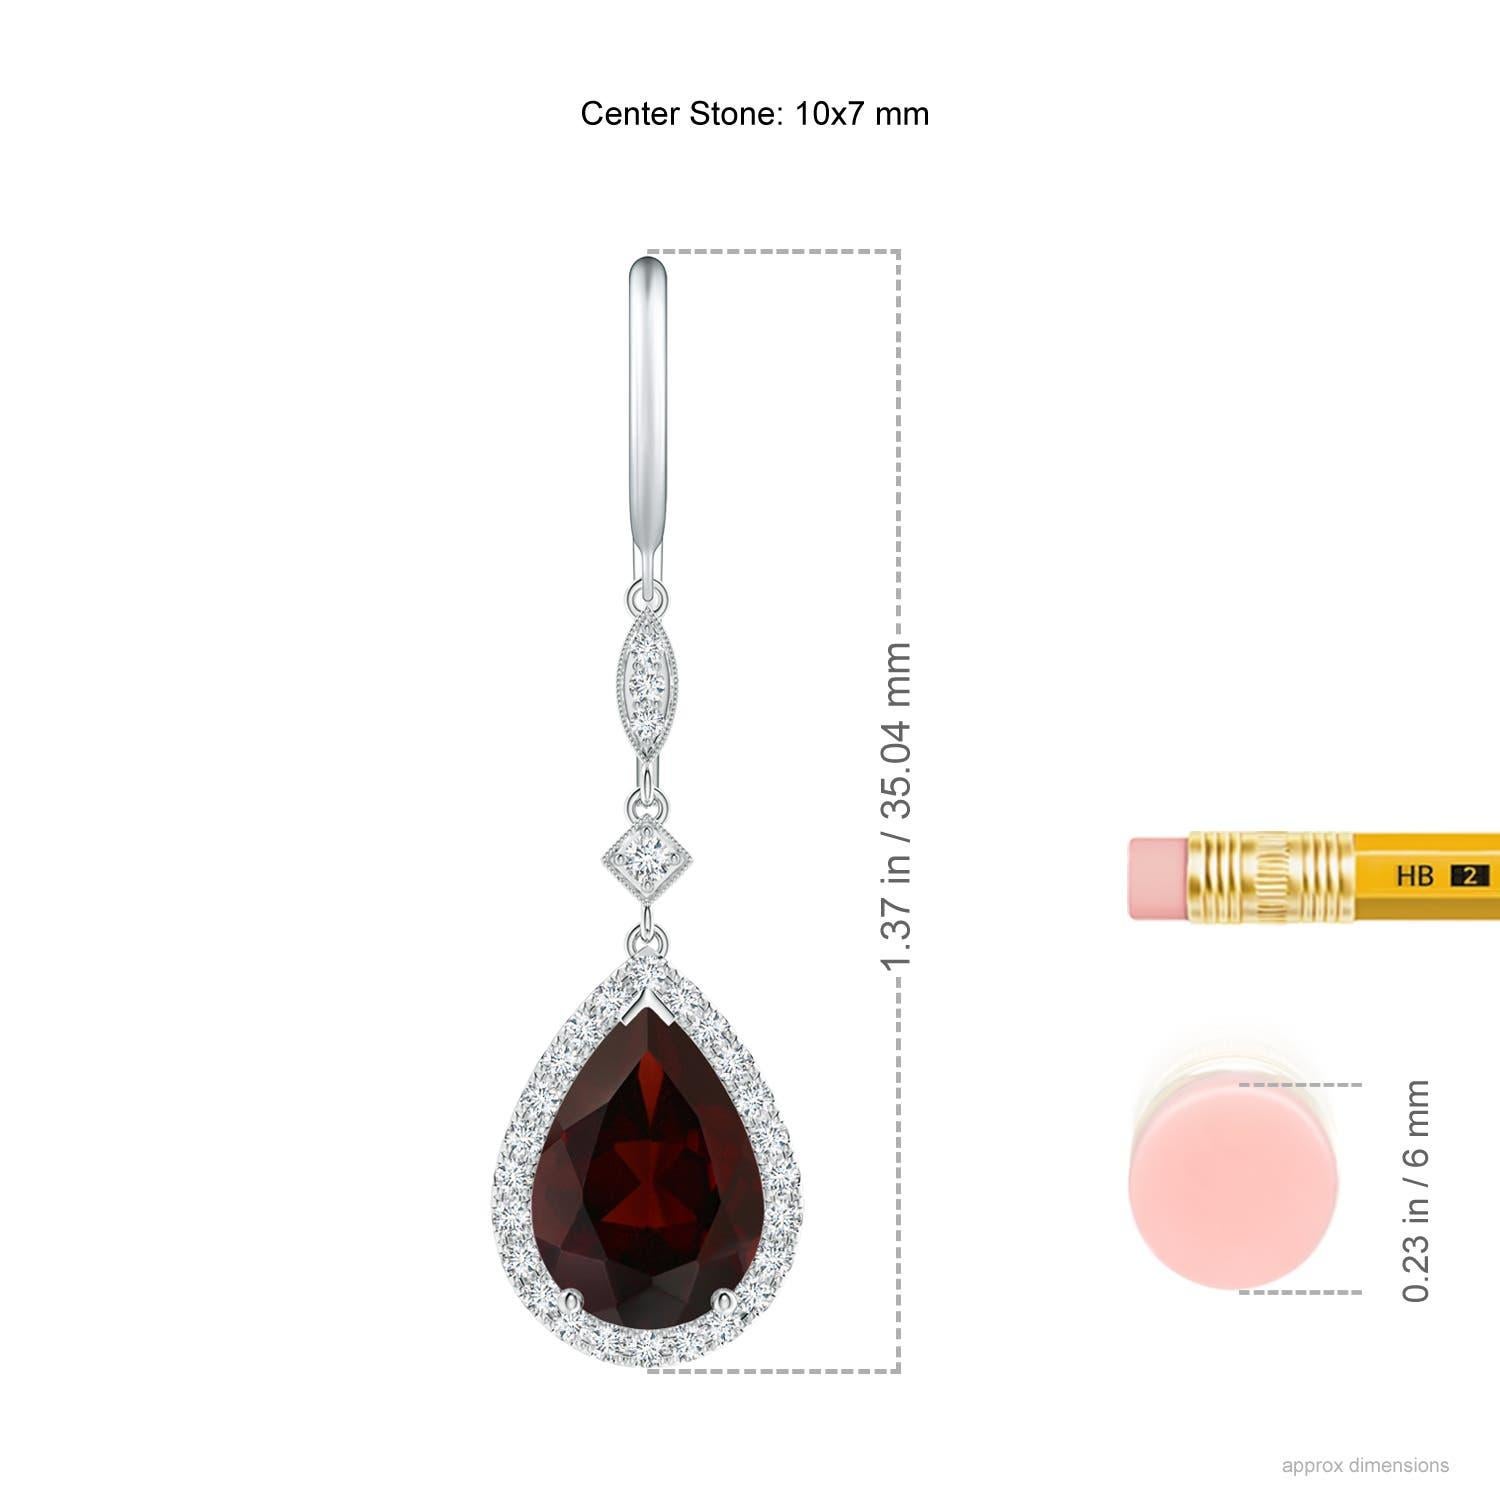 Dangling from shepherd hooks are these beautifully crafted garnet dangle earrings in 14K white gold. Pear-shaped garnets are illuminated by a halo of precious white diamonds that create a remarkable contrast. They are connected to station diamonds